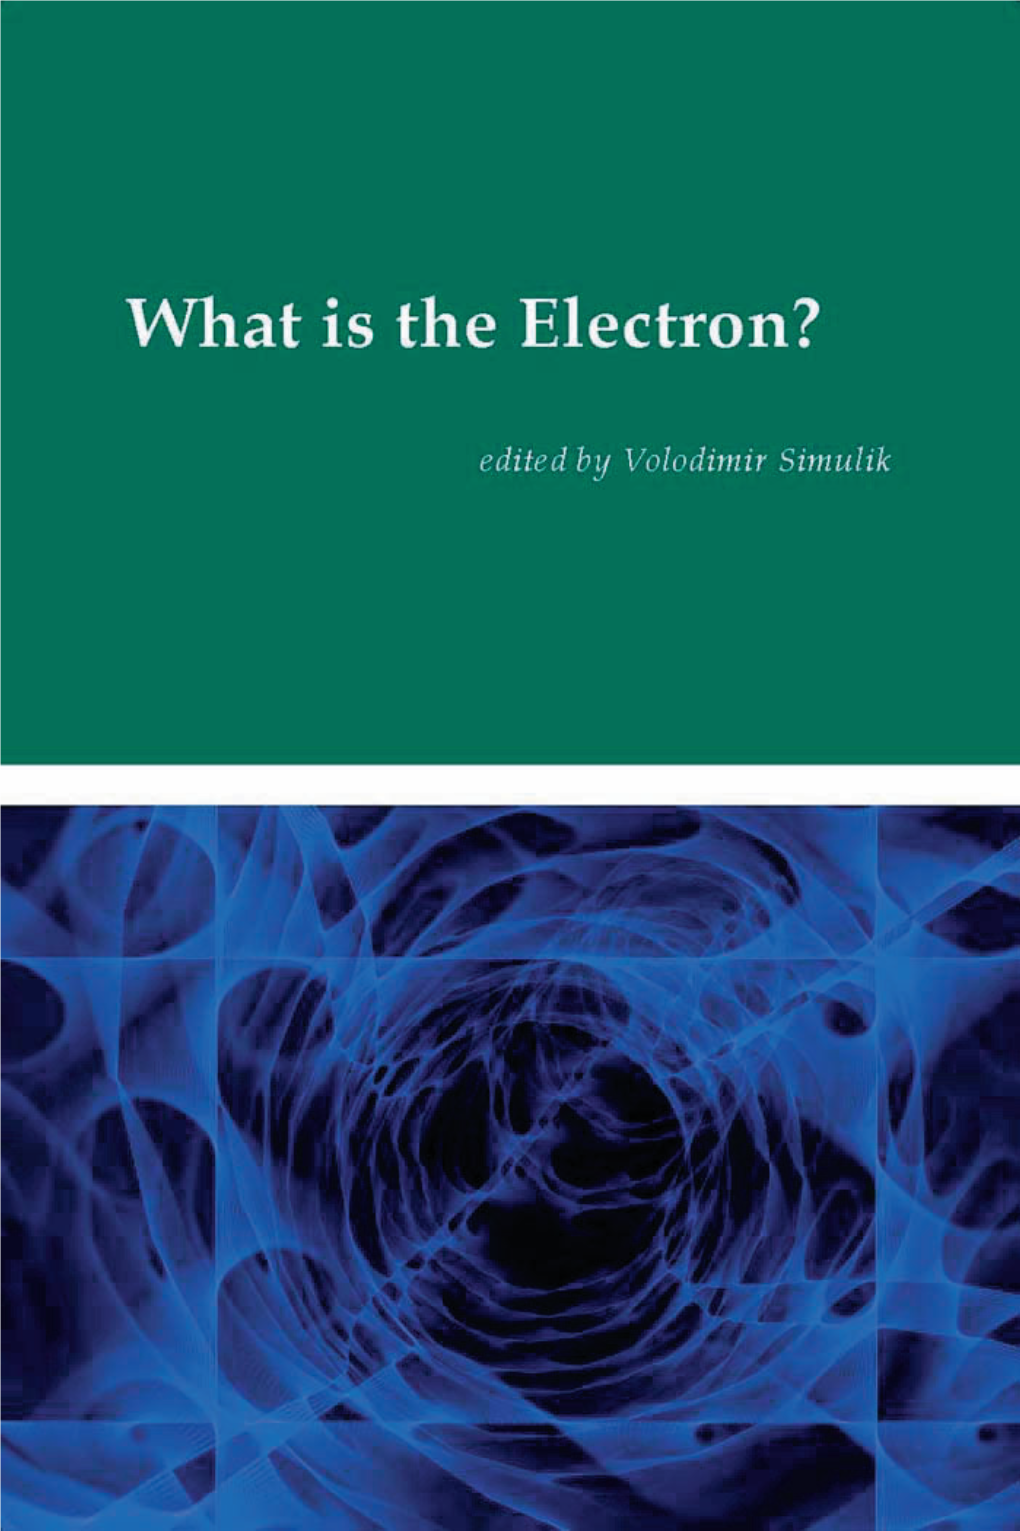 What Is the Electron?